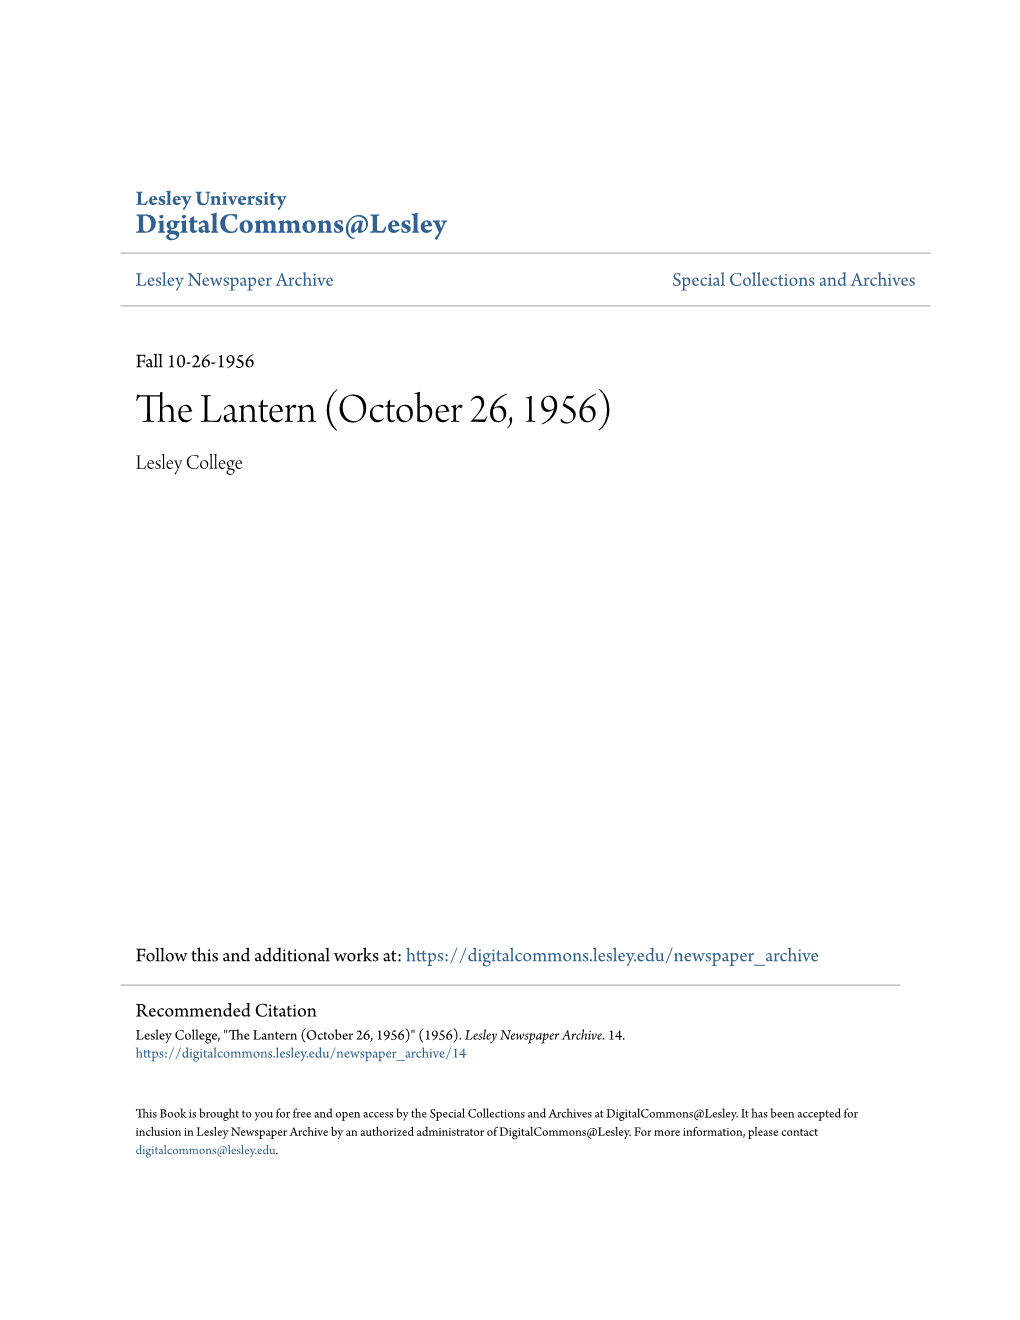 The Lantern (October 26, 1956) Lesley College